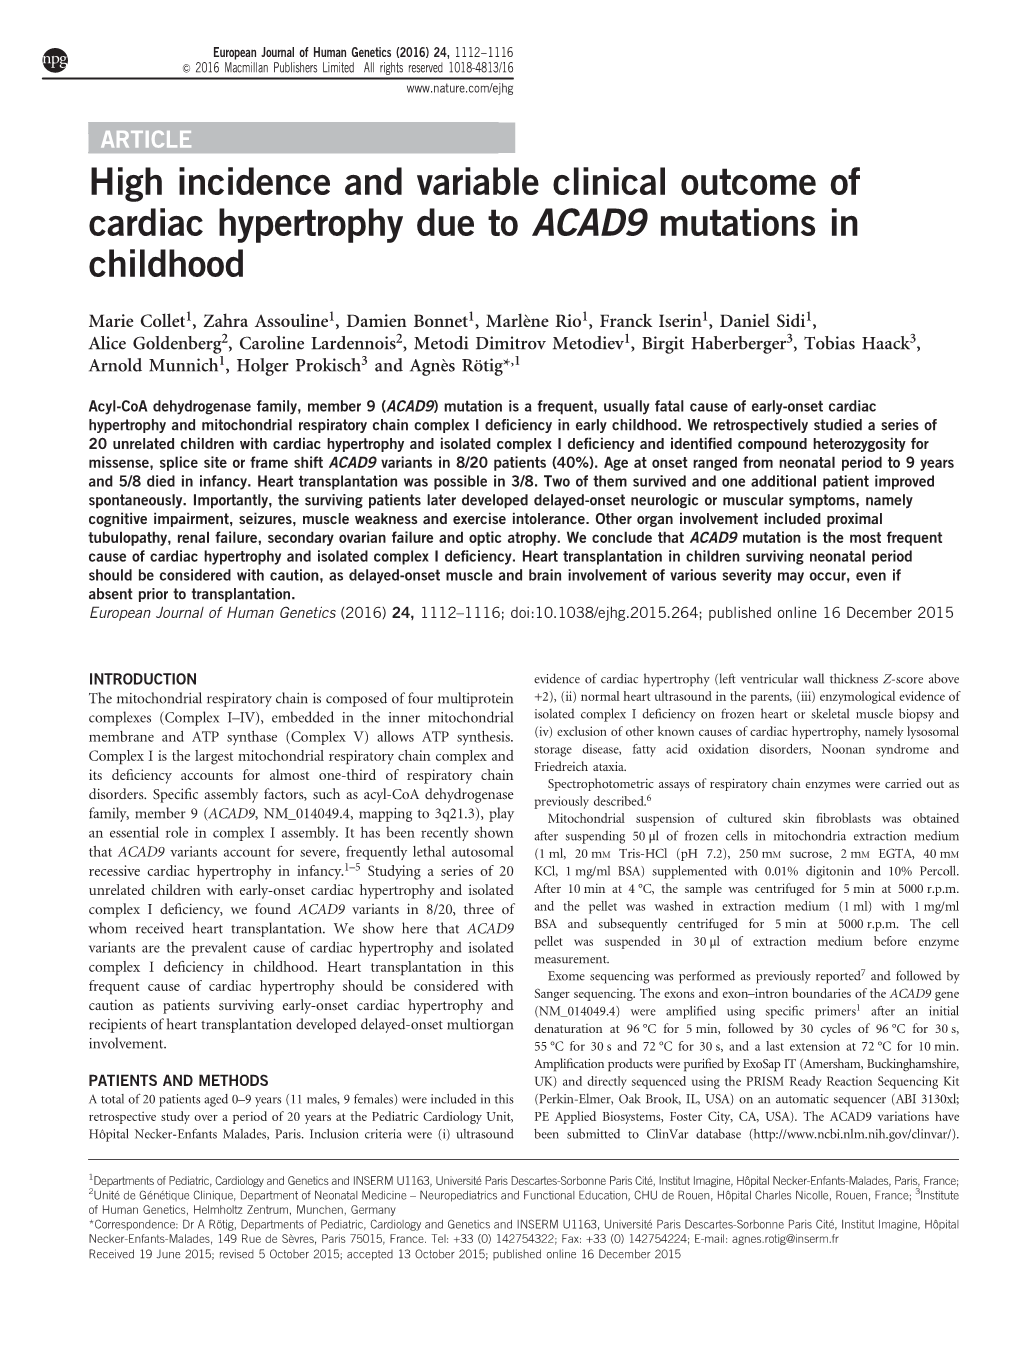 High Incidence and Variable Clinical Outcome of Cardiac Hypertrophy Due to ACAD9 Mutations in Childhood